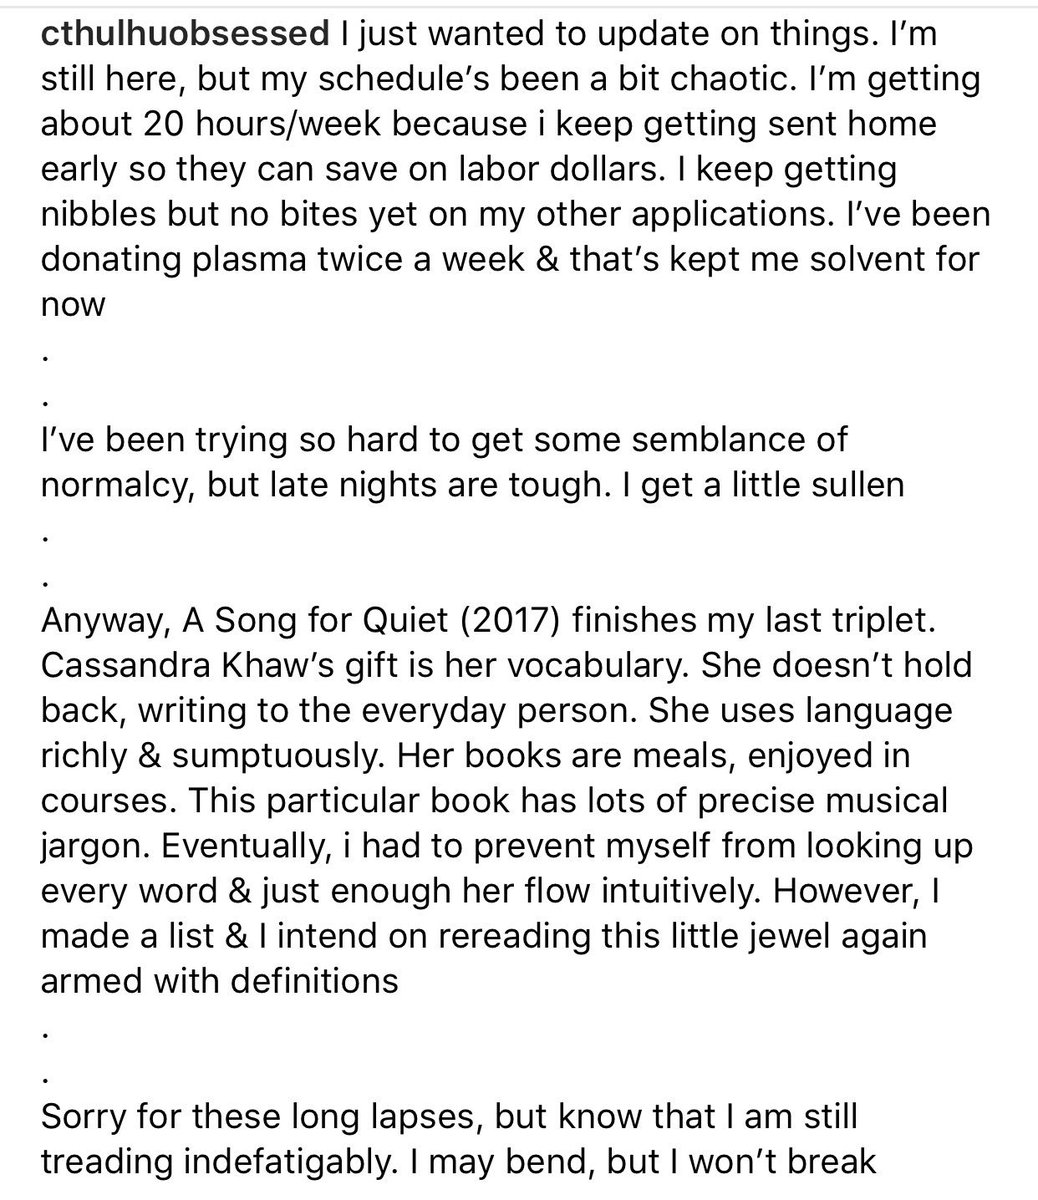 I made an update & book review of @casskhaw’s A Song for Quiet on my IG. I thought I’d share that post here to both share life stuff & also to give her book a more detailed review than just a “tweet review”. 

#bookstagram #cassandrakhaw #asongforquiet #jeffreyalanlove